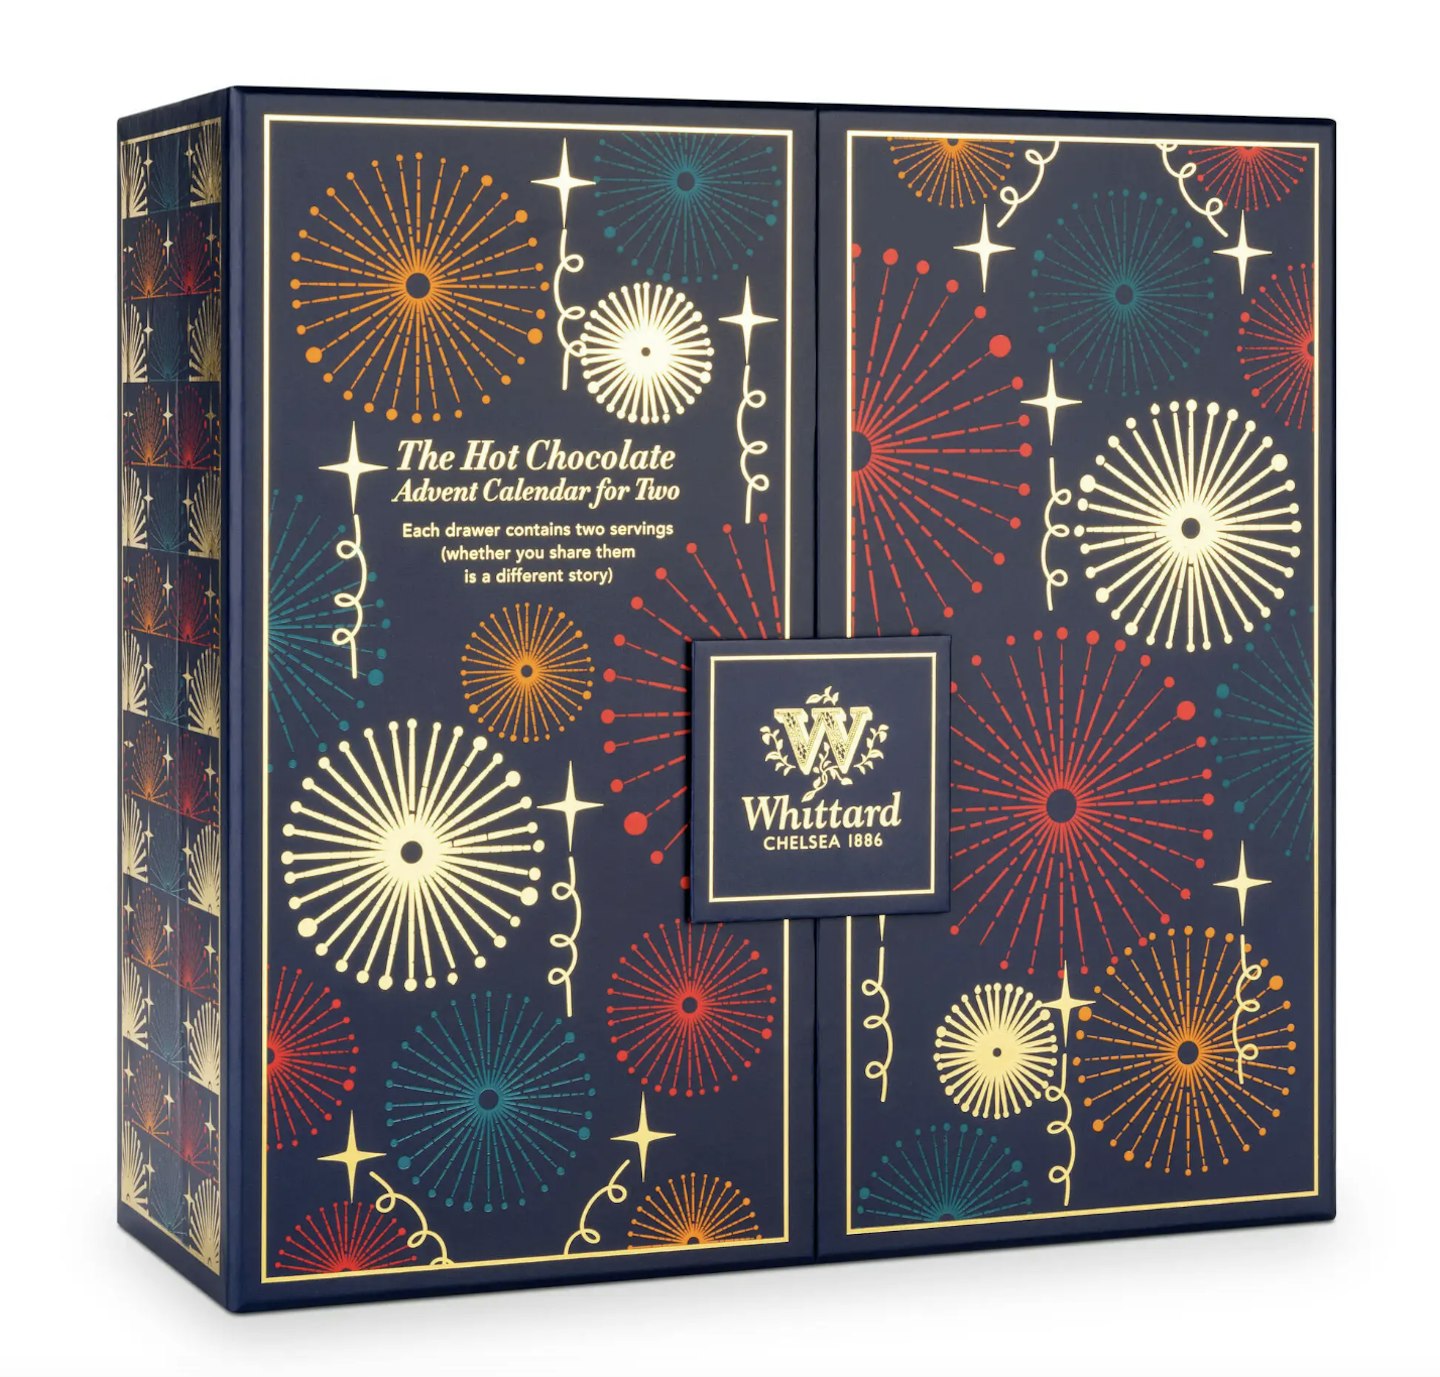 Whittard's The Hot Chocolate Advent Calendar for Two